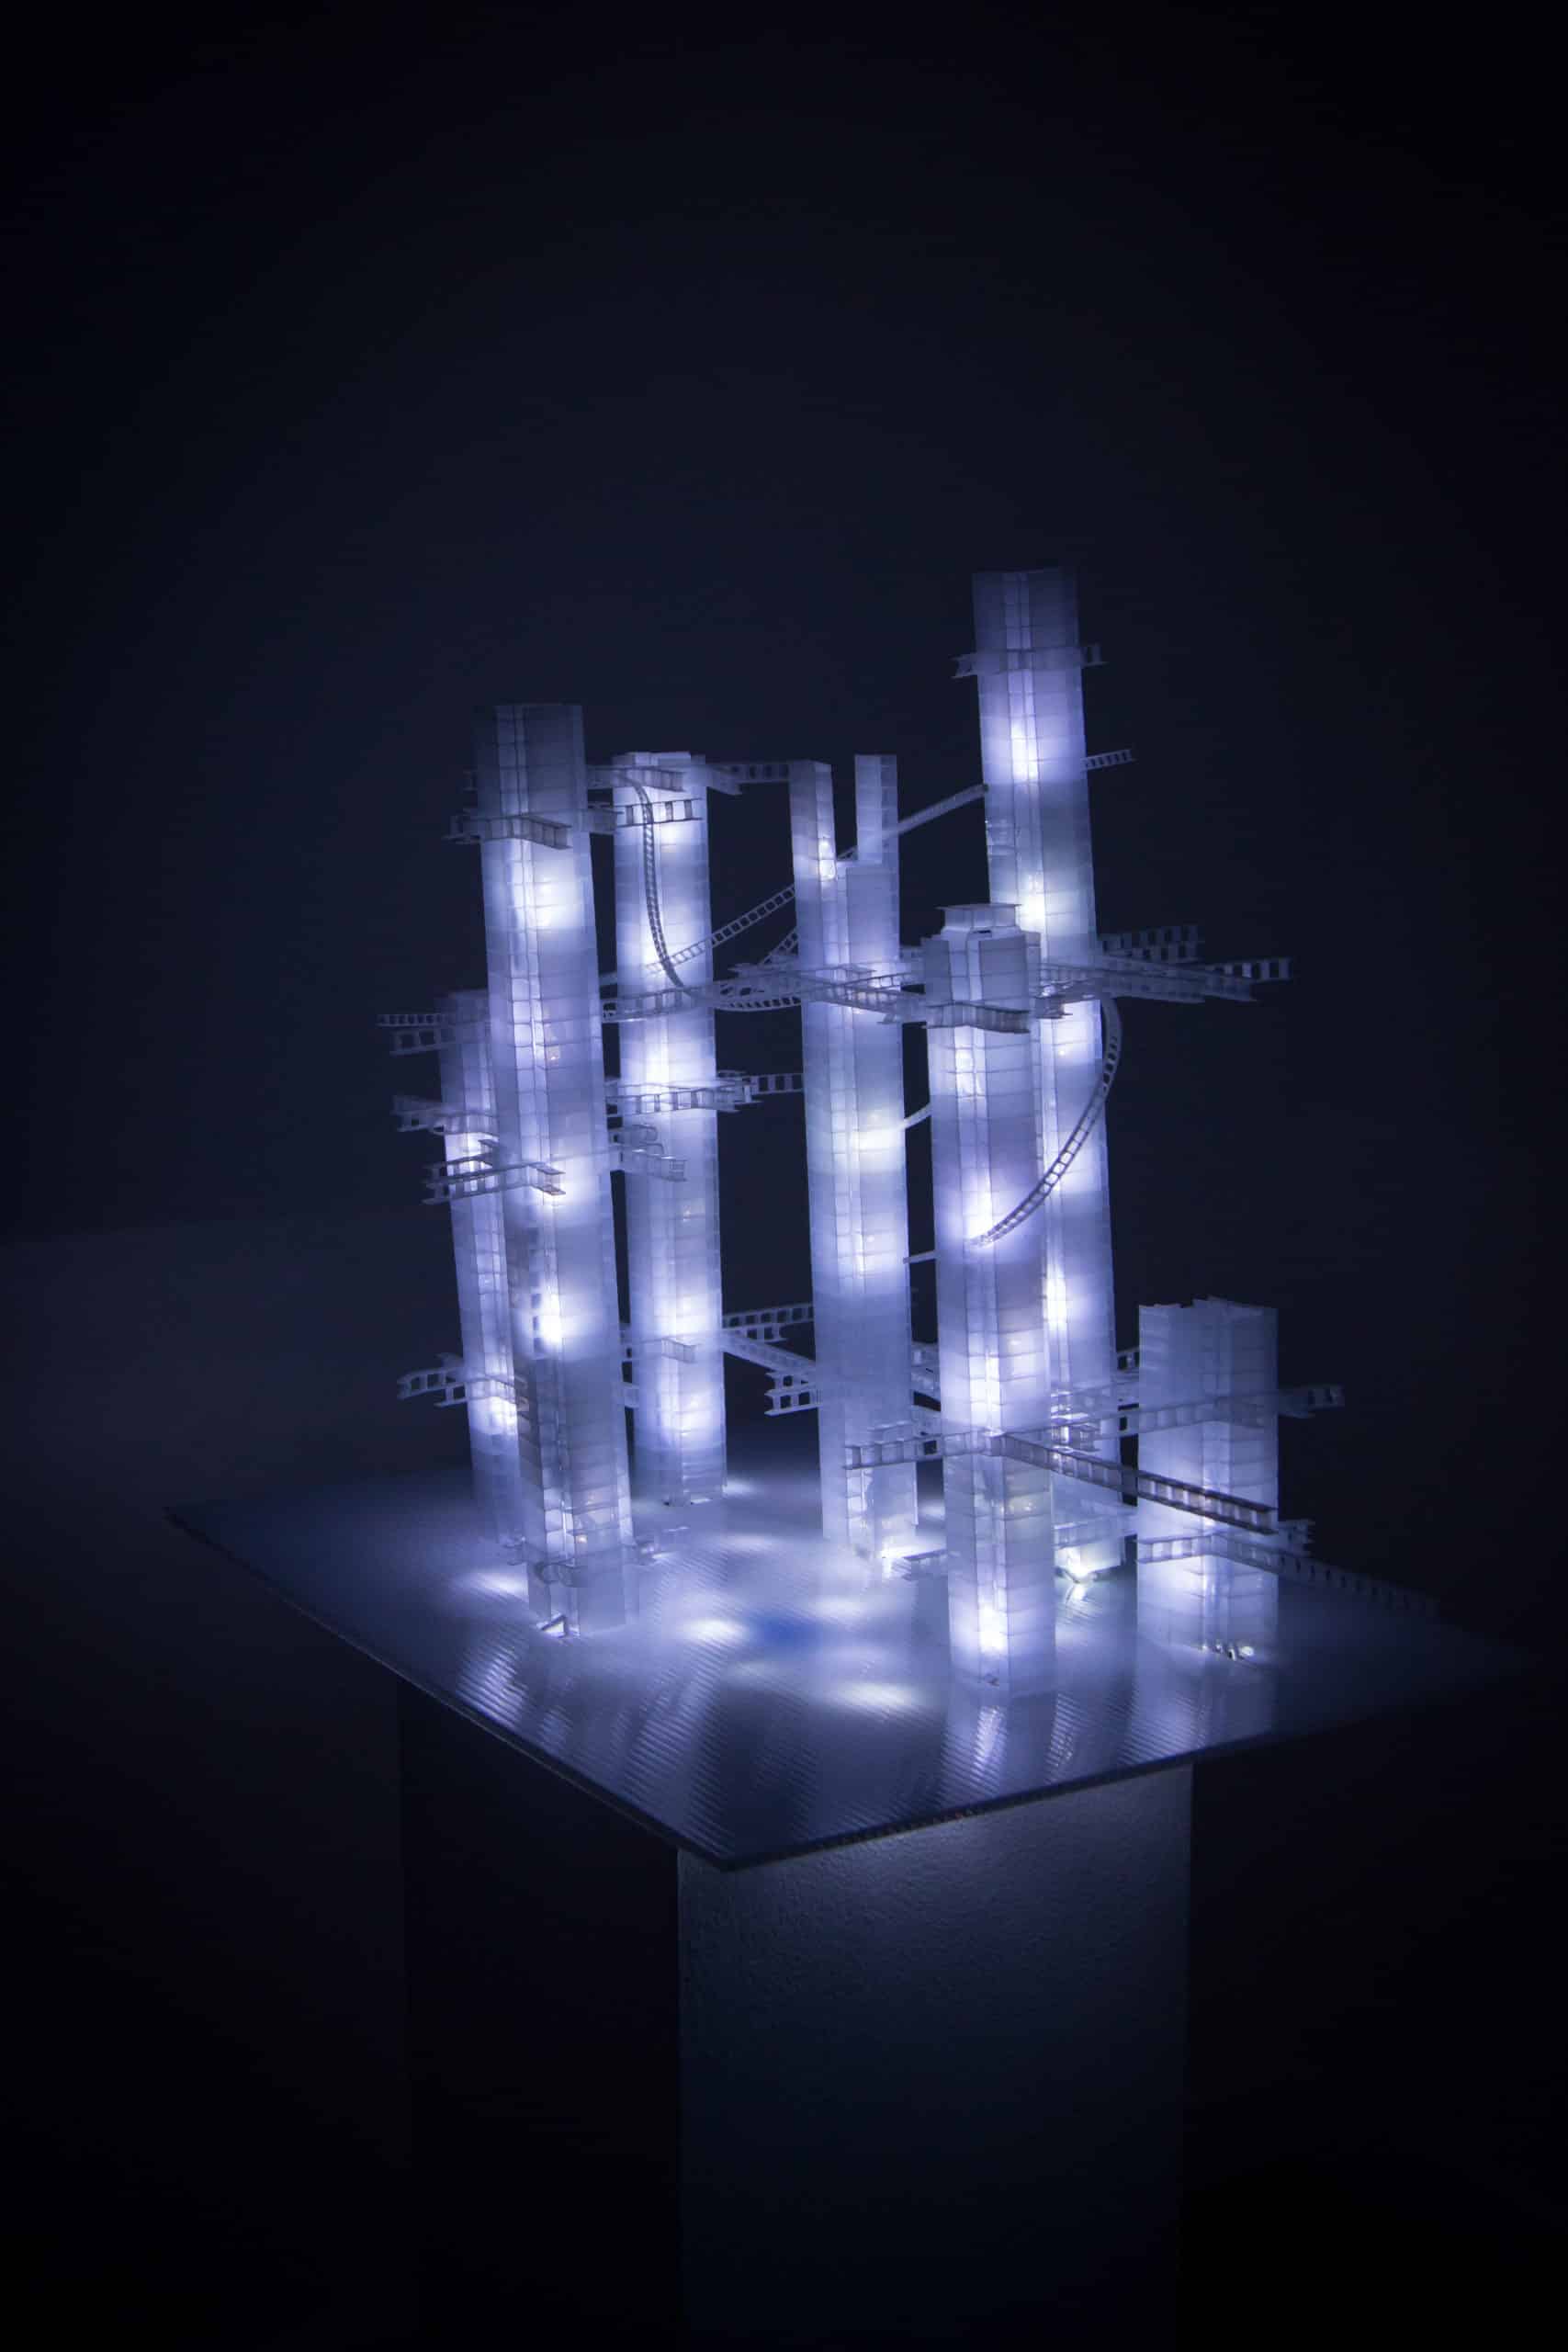 This Years' Model, a.k.a If You Lived Here, You'd be Home by Now, free-standing soft white original handmade Lumencrafter LED light sculpture, square columns of different heights connected by swirls of laddered polycarbonate twinwall strips, glowing blue-white at Arcadia Art Gallery, Toronto, 2014.